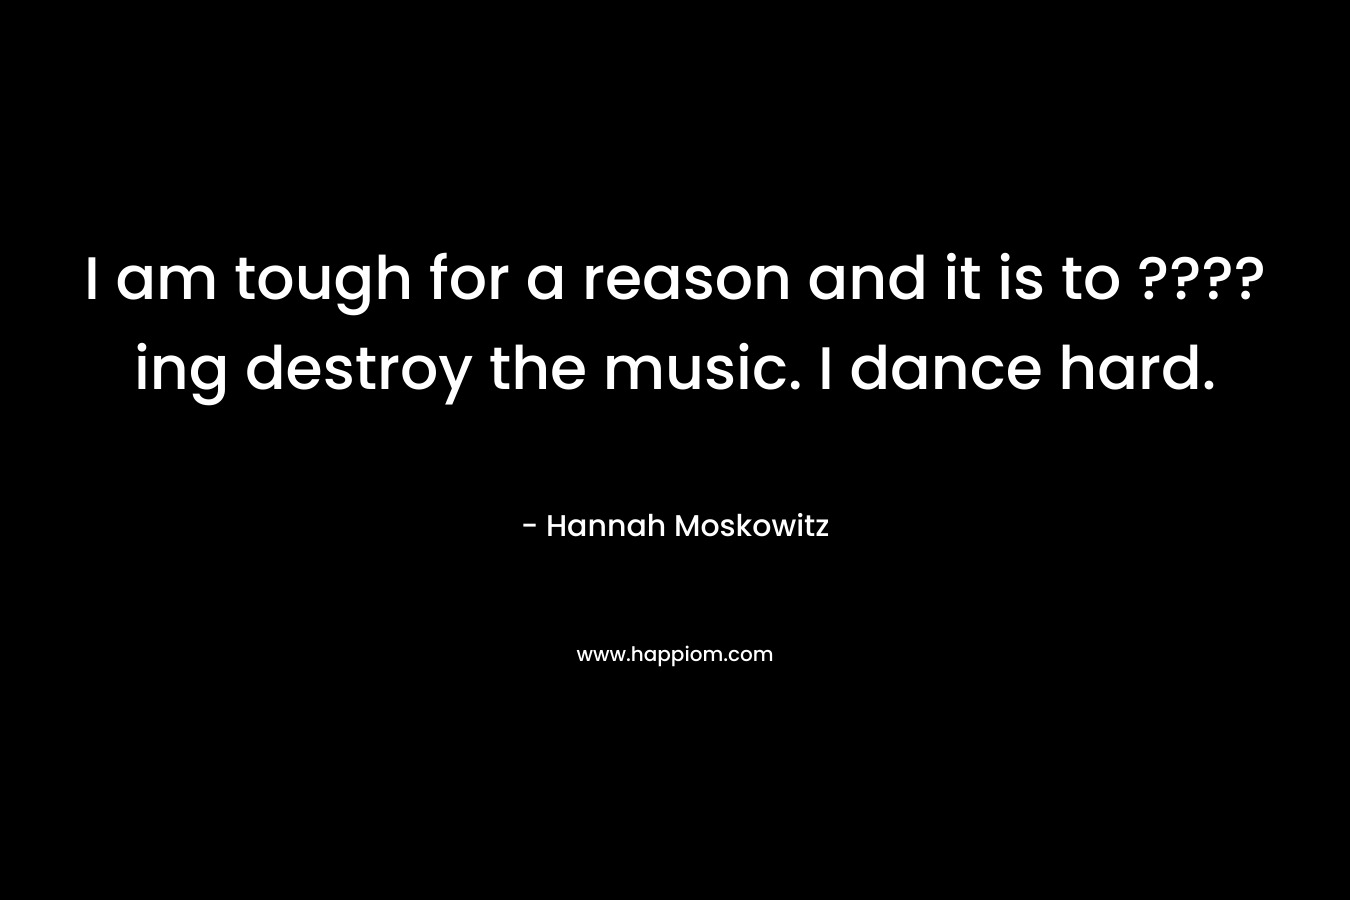 I am tough for a reason and it is to ????ing destroy the music. I dance hard.